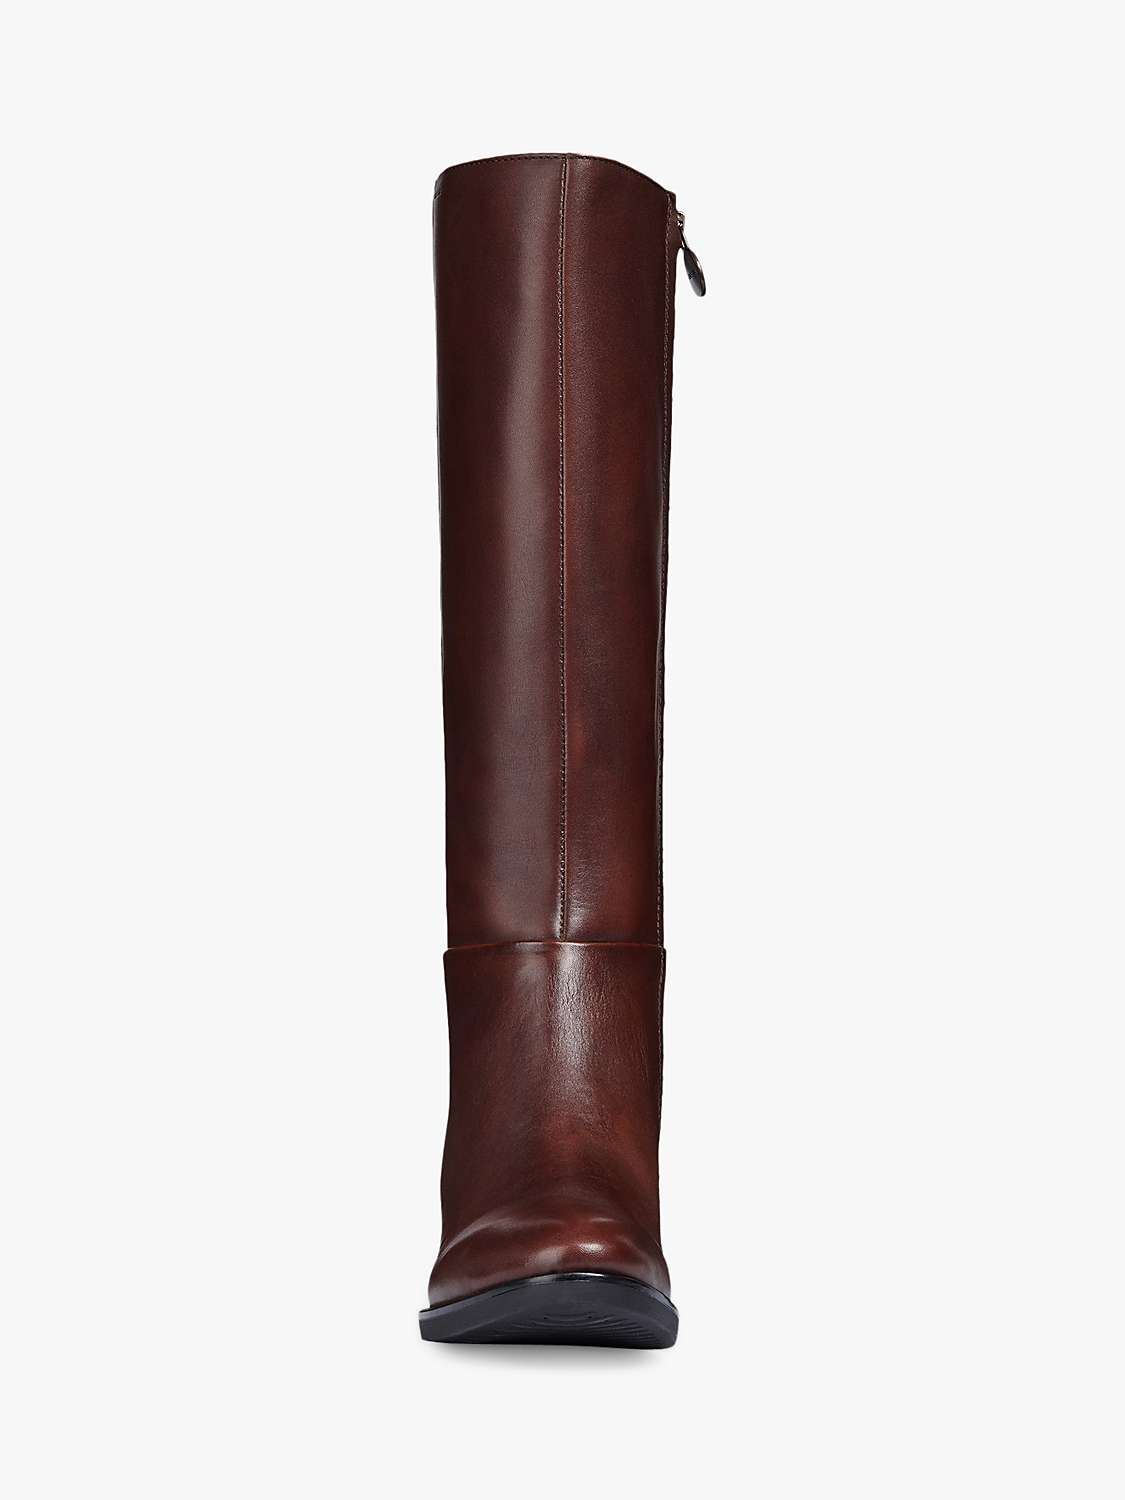 Buy Geox Women's Felicity Leather Heeled Knee High Boots Online at johnlewis.com